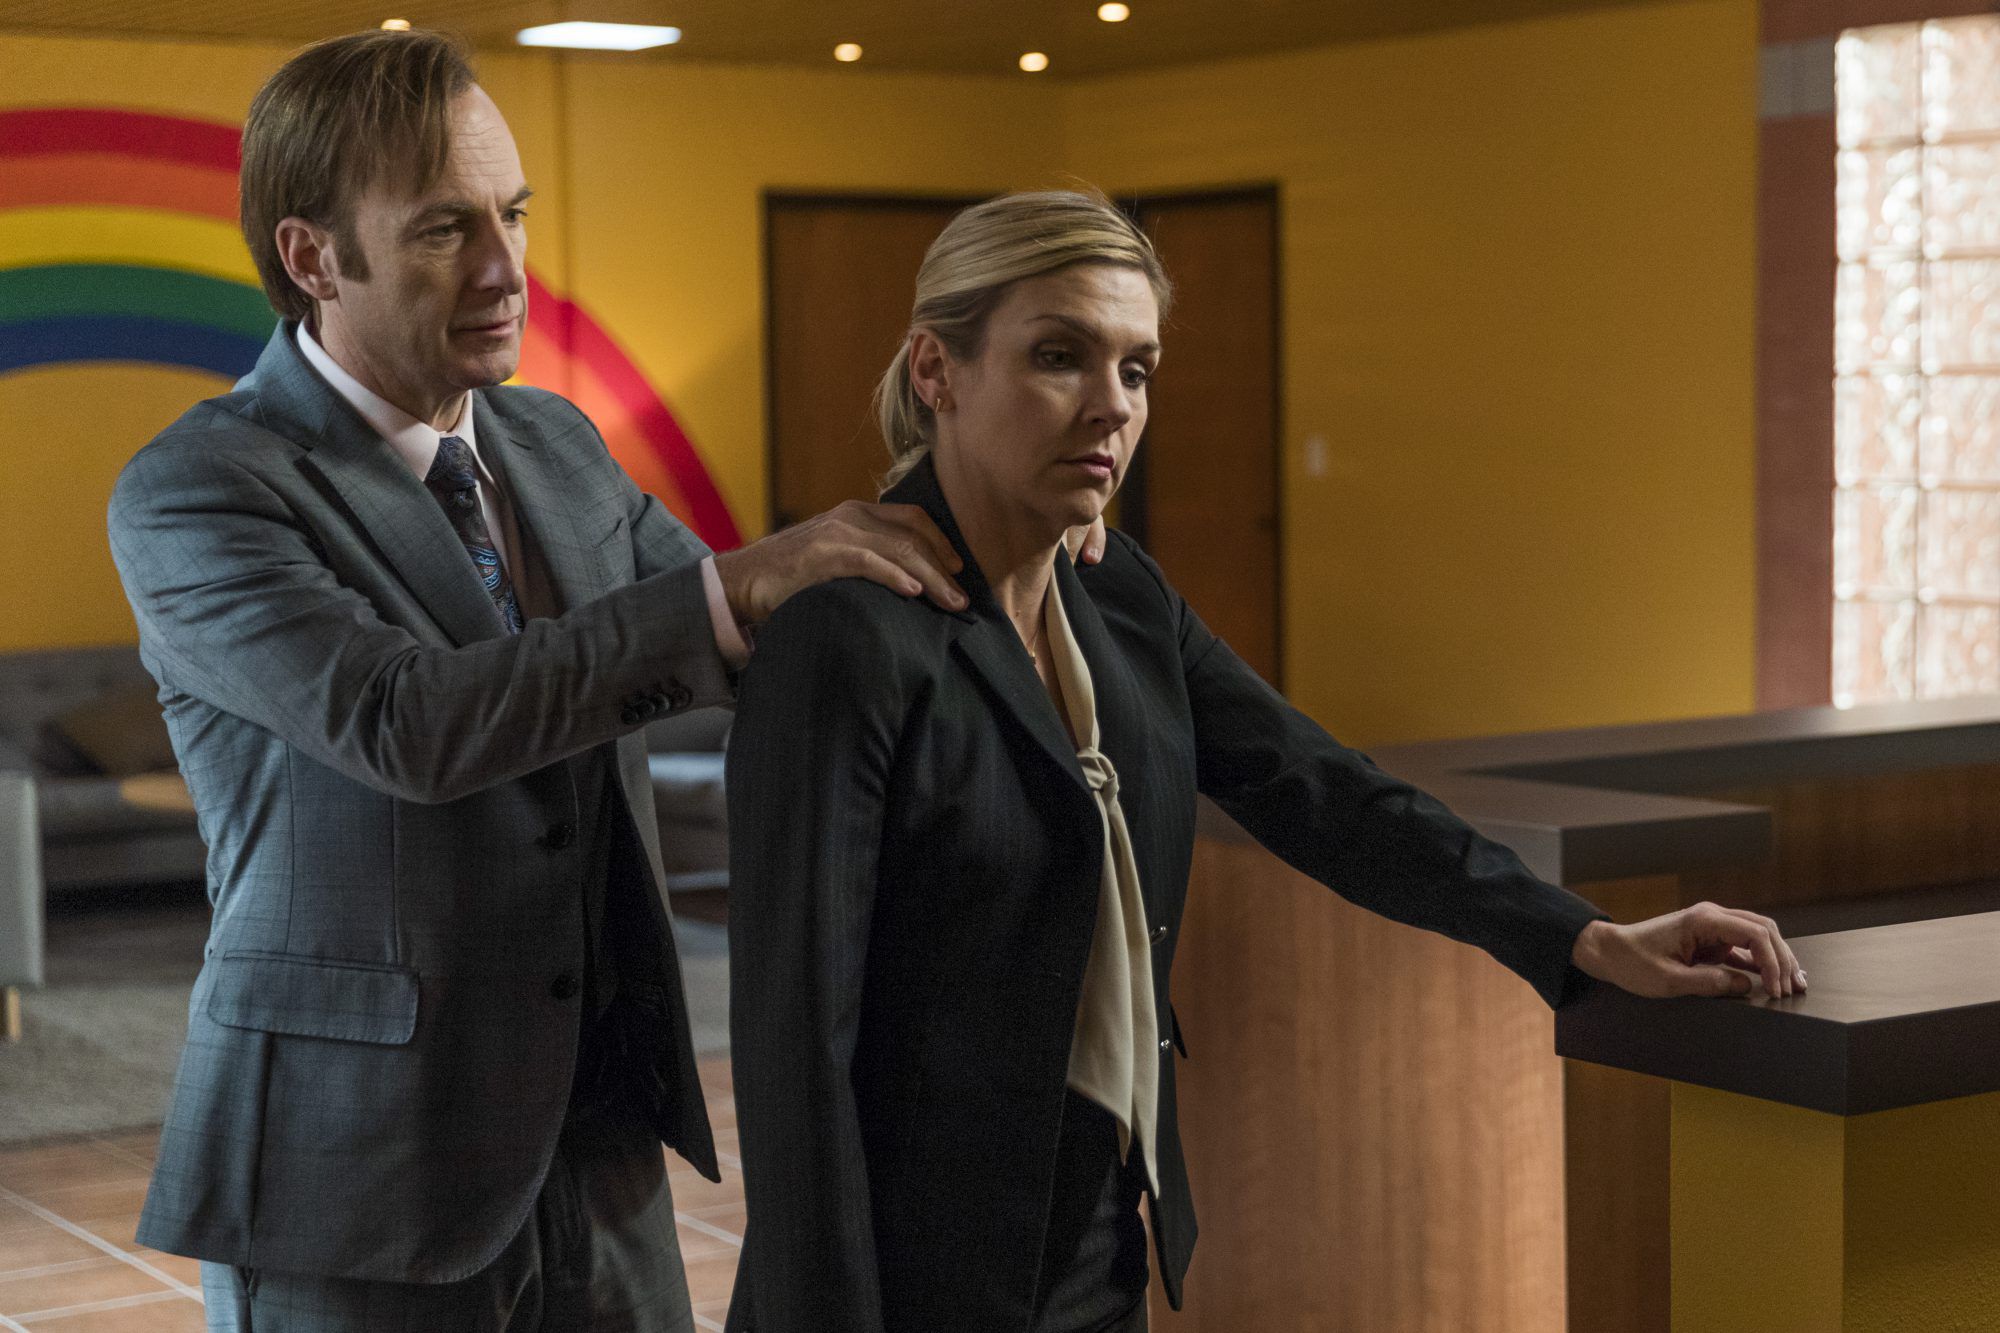 bcs 301 ms 1007 0384 rt e1491760682800 Better Call Saul Inches Towards Breaking Bad on Its Own Terms